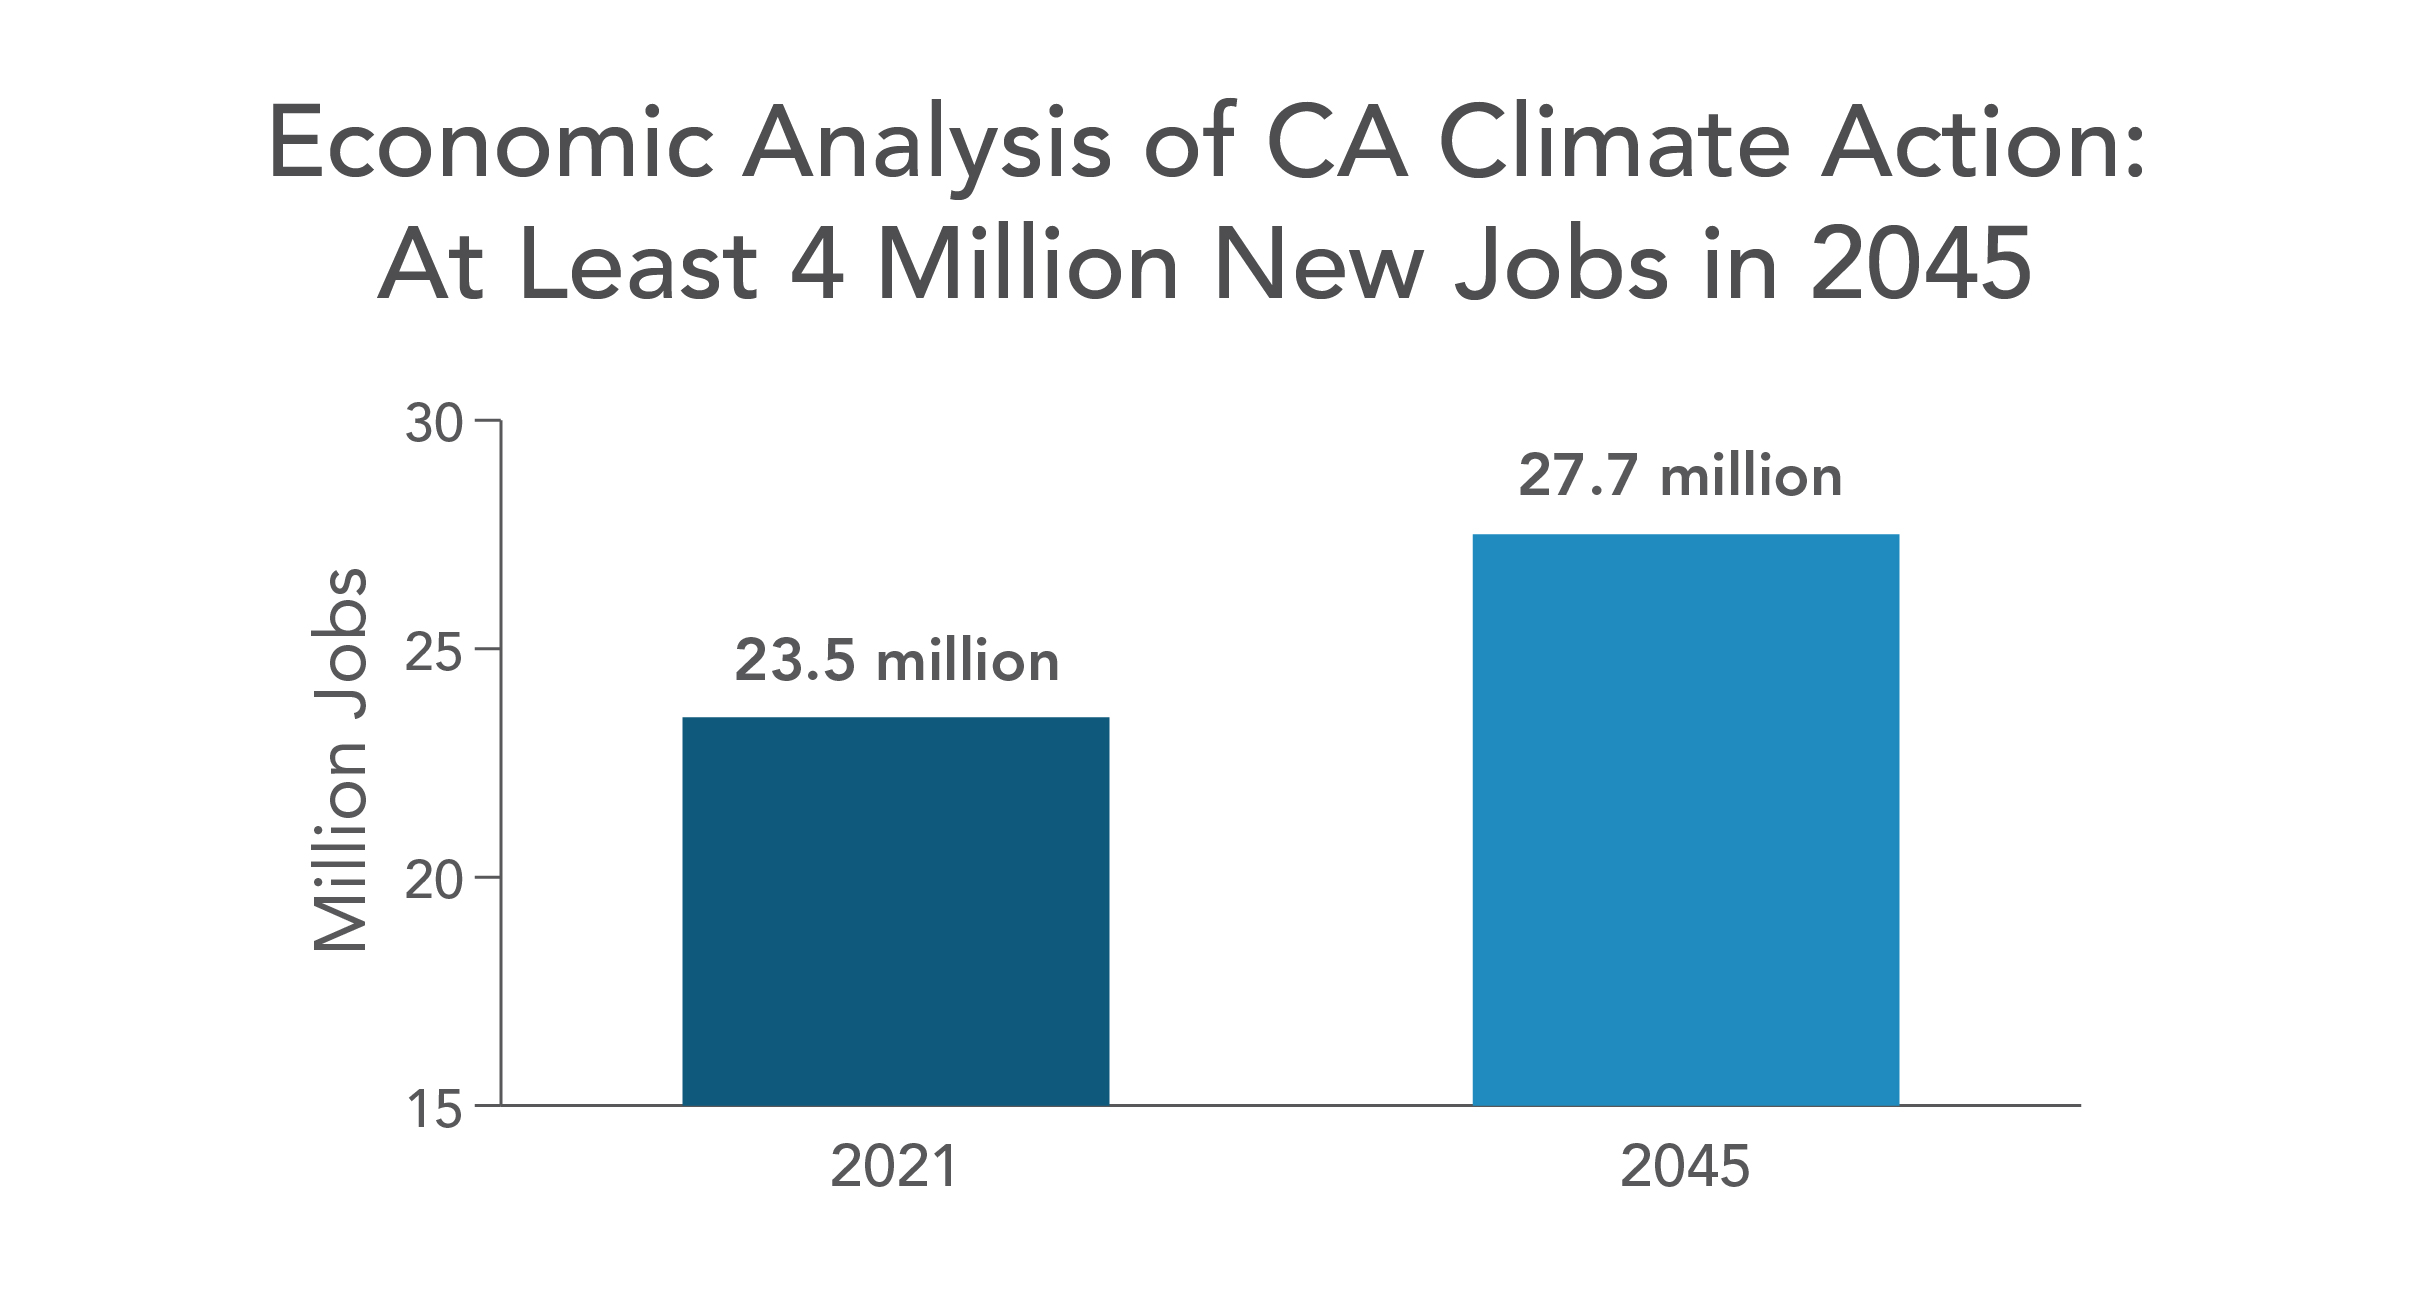 Economic analysis of CA Climate Action: At least 4 million new jobs in 2045. Bar chart showing growth in jobs from 23.5 million in 2021 to 27.7 million in 2045